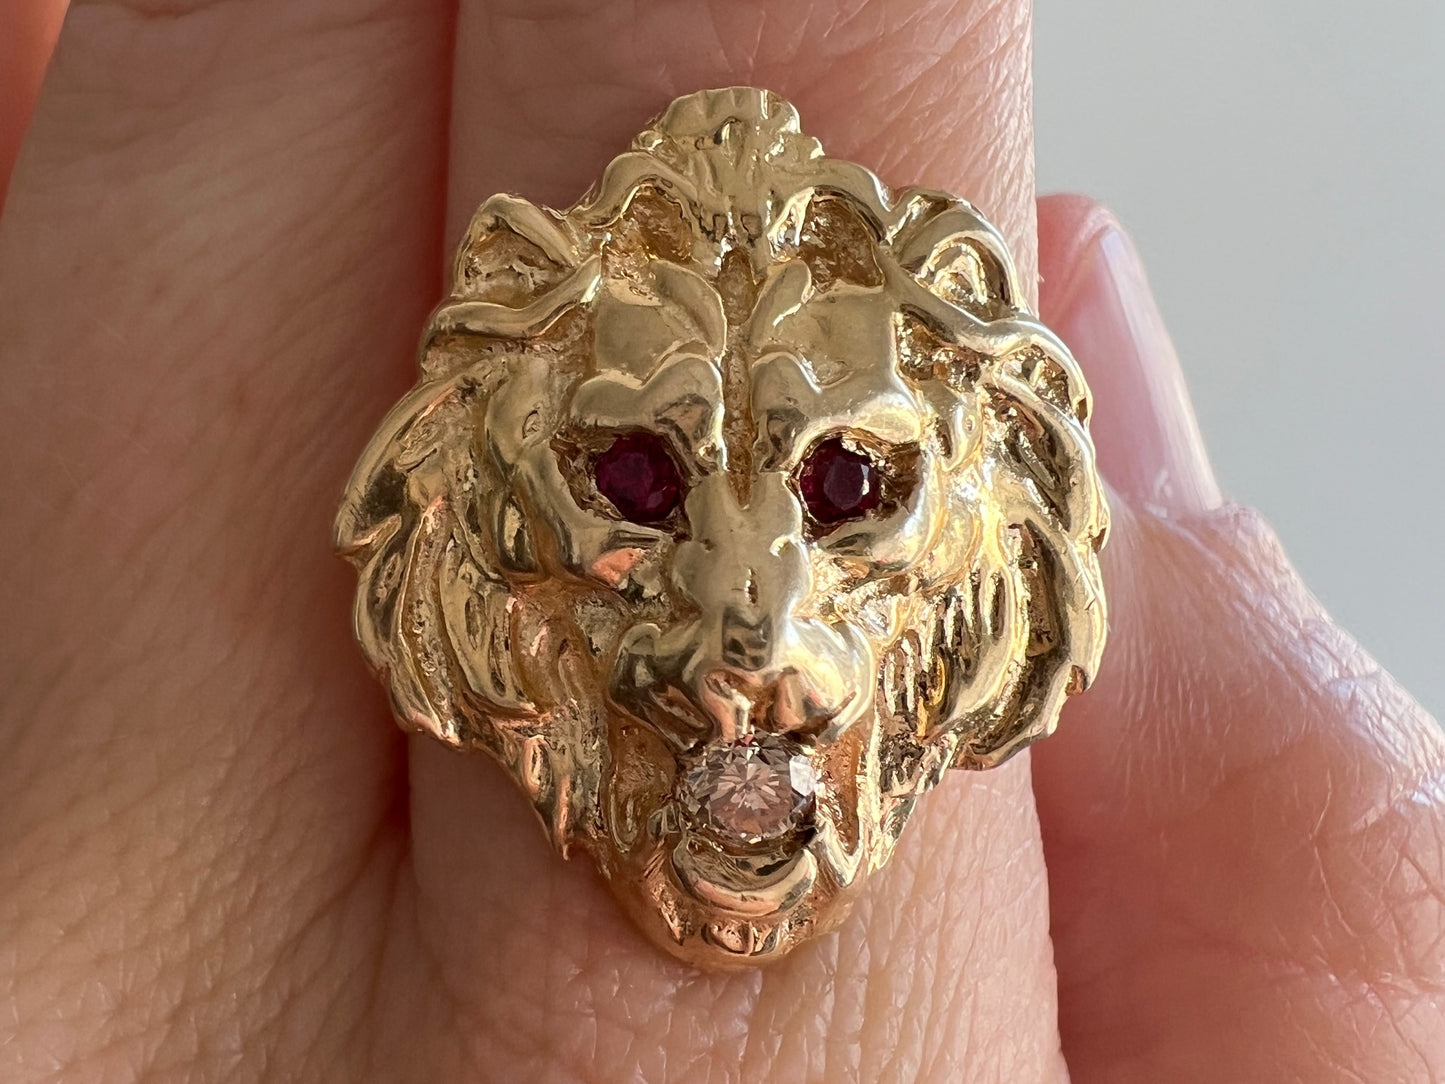 reimagined V I N T A G E // big cat strength / solid 14k yellow gold with diamond and rubies / size 7.5